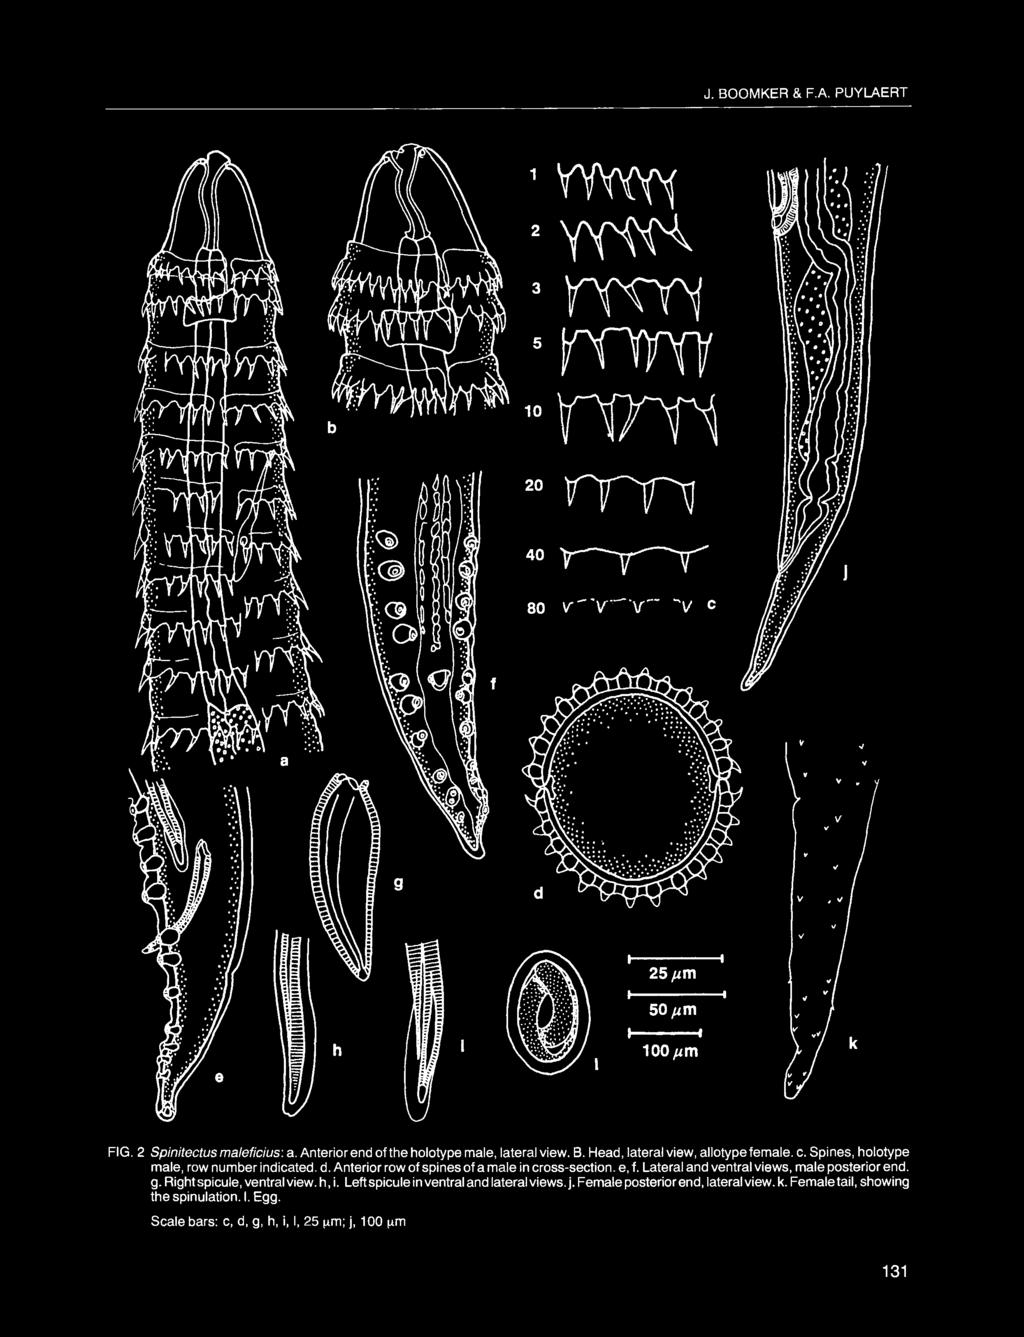 Spines, holotype male, row number indicated. d. Anterior row of spines of a male in cross-section. e, f. Lateral and ventral views, male posterior end. g.